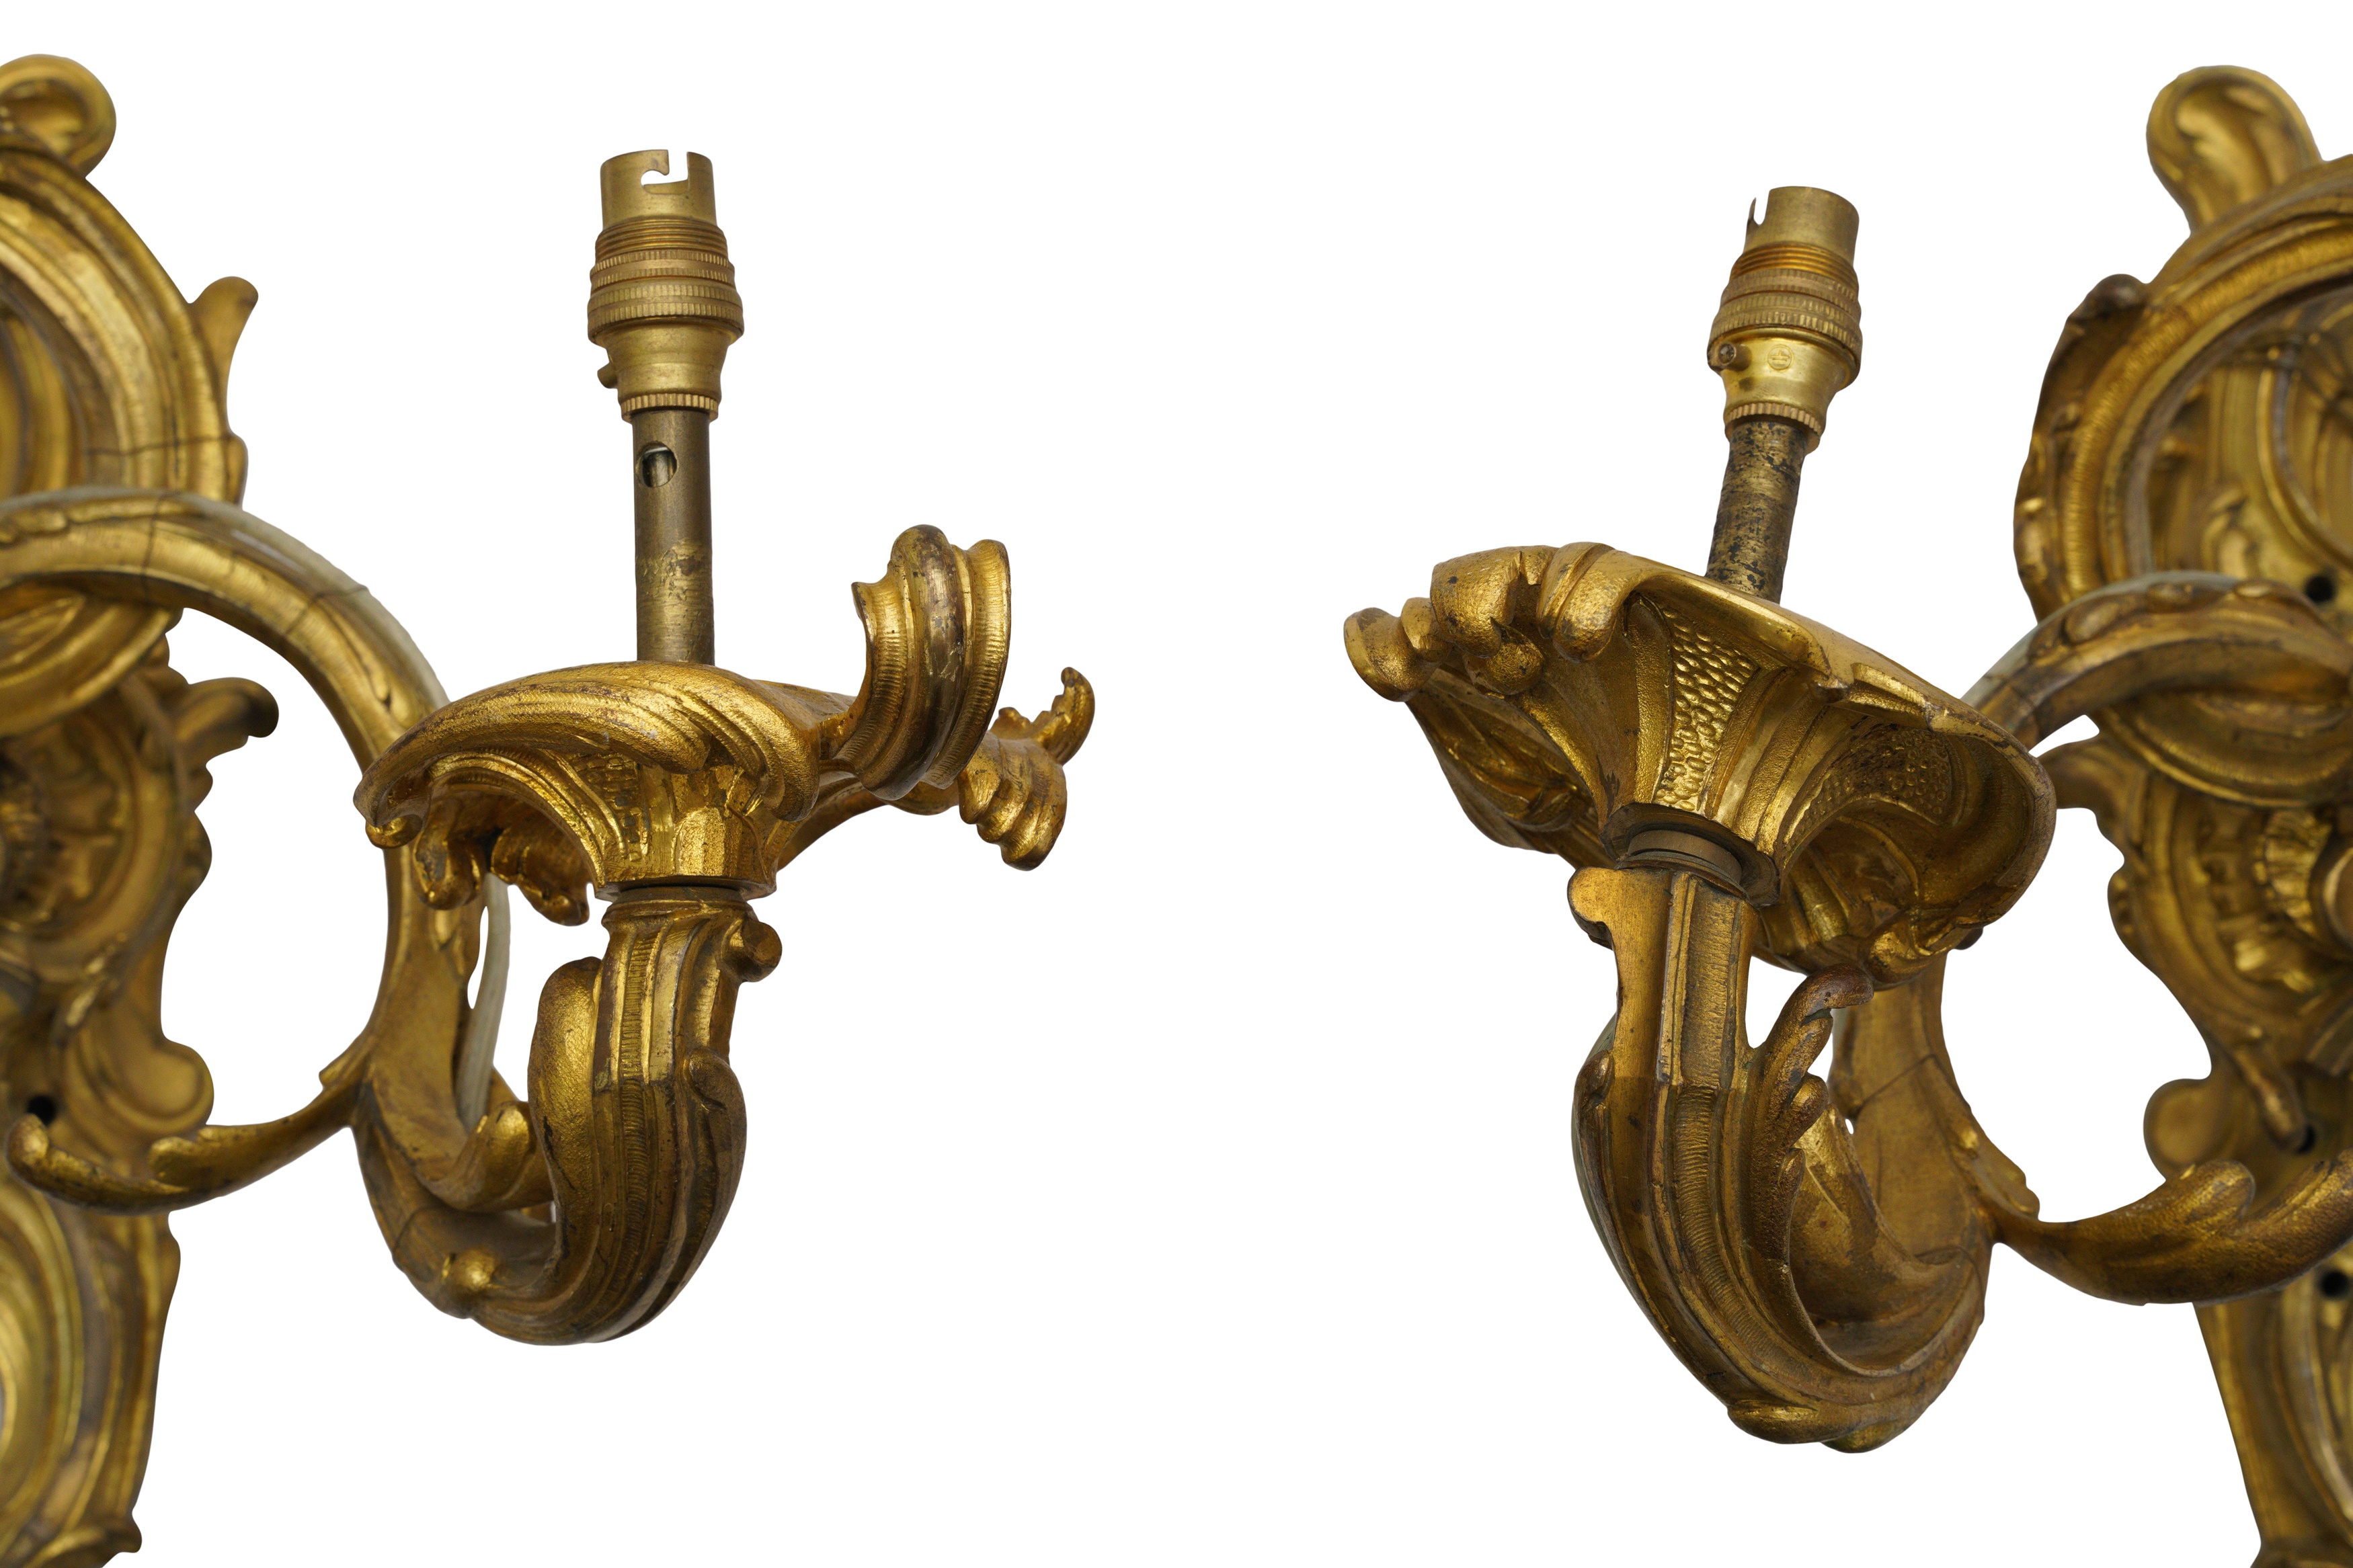 A PAIR OF GILT BRONZE ORMOLU TWIN BRANCH WALL SCONCES IN THE ROCOCO MANNER - Image 3 of 5